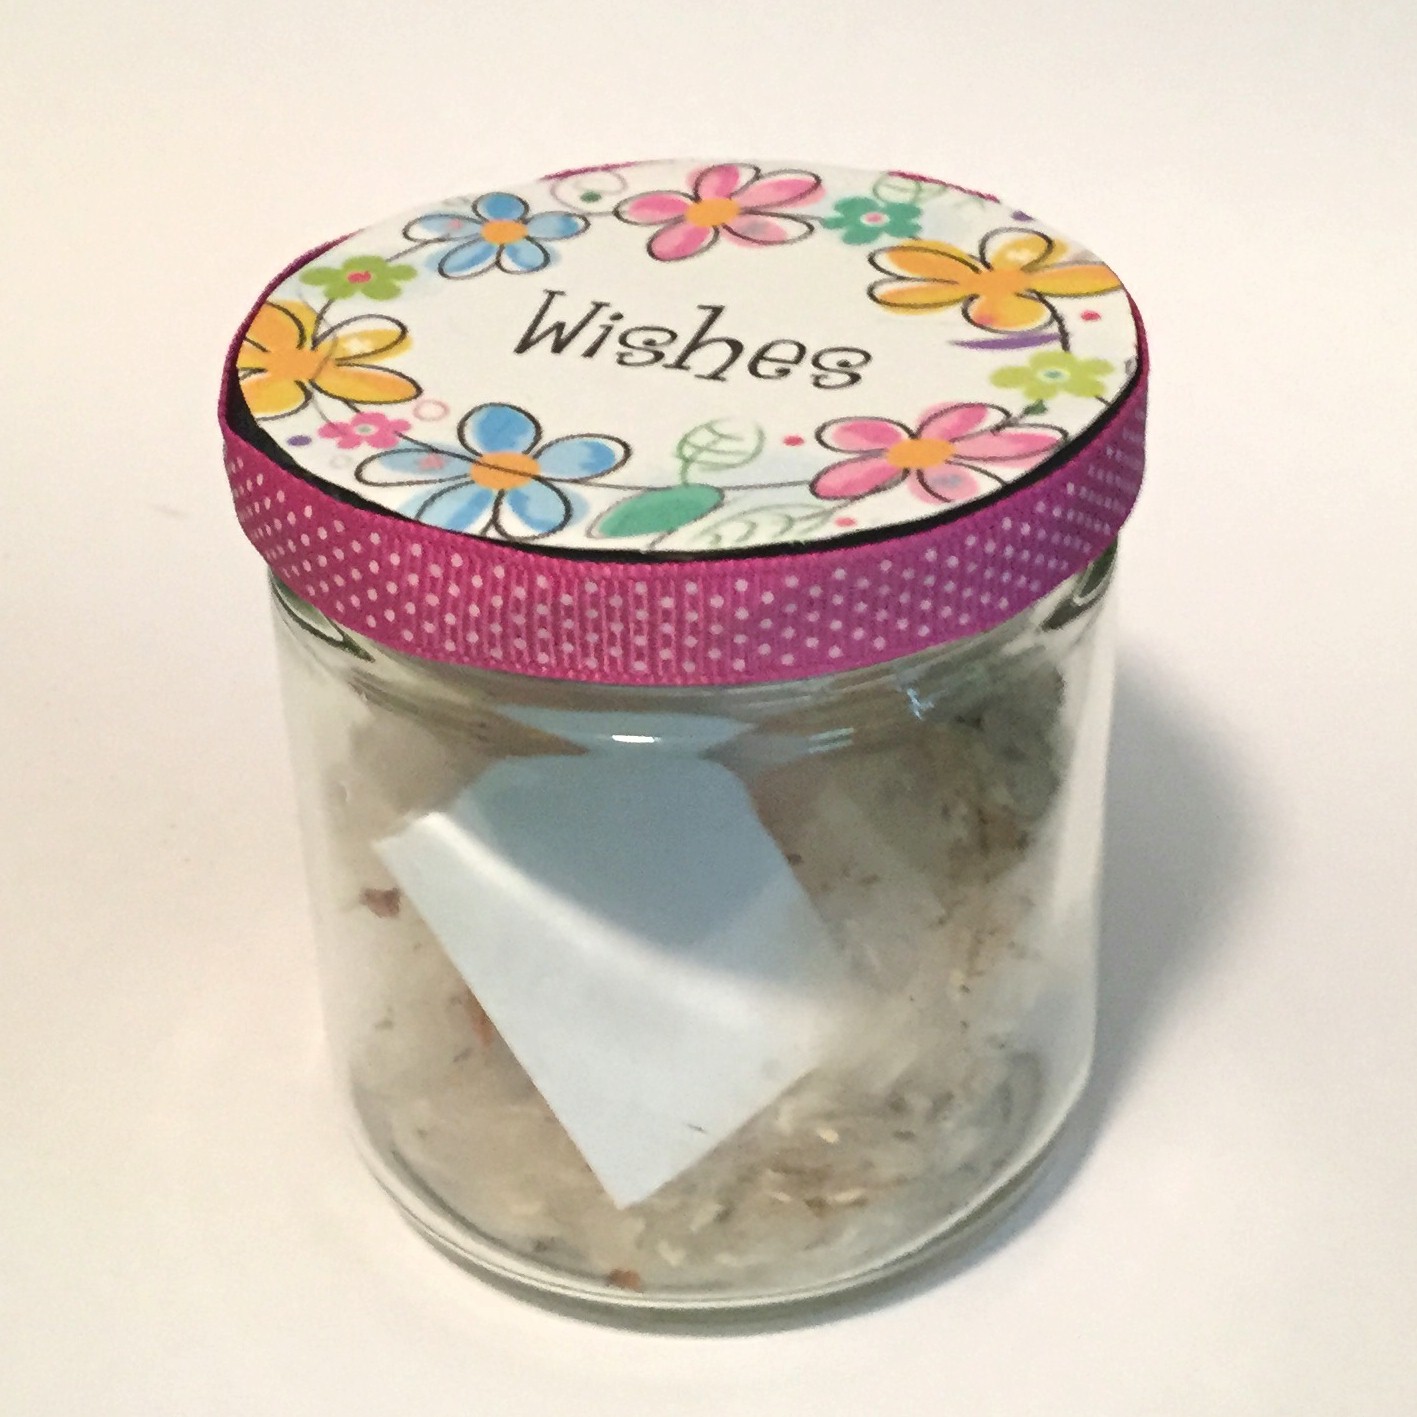 Recycled Wishes Jar Craft